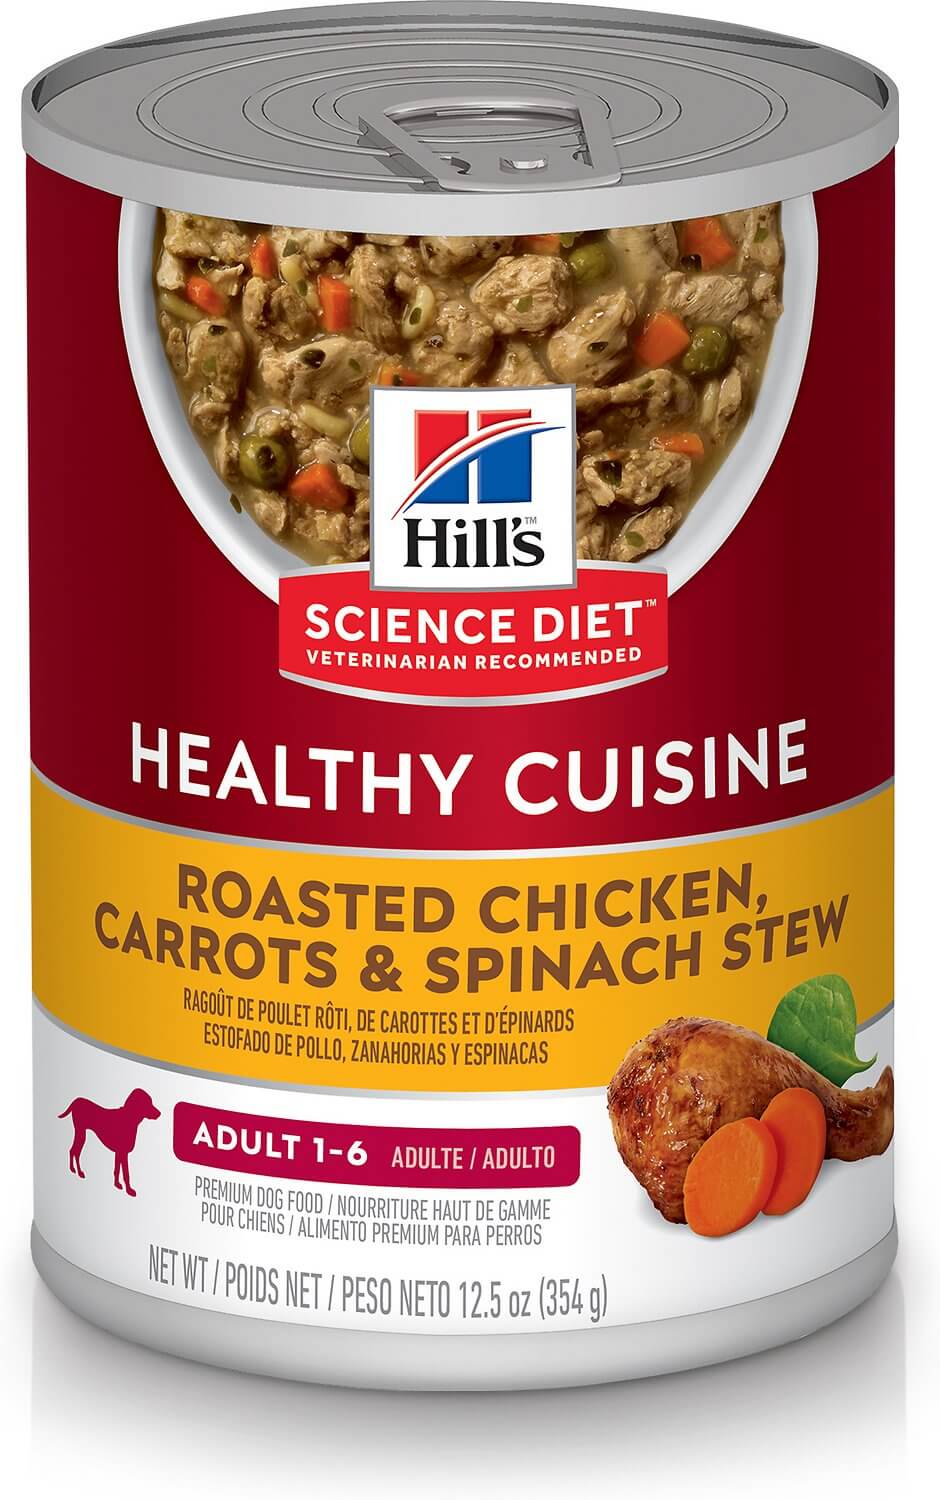 Hill’s Science Diet Healthy Cuisine Dog Food Review (Canned)